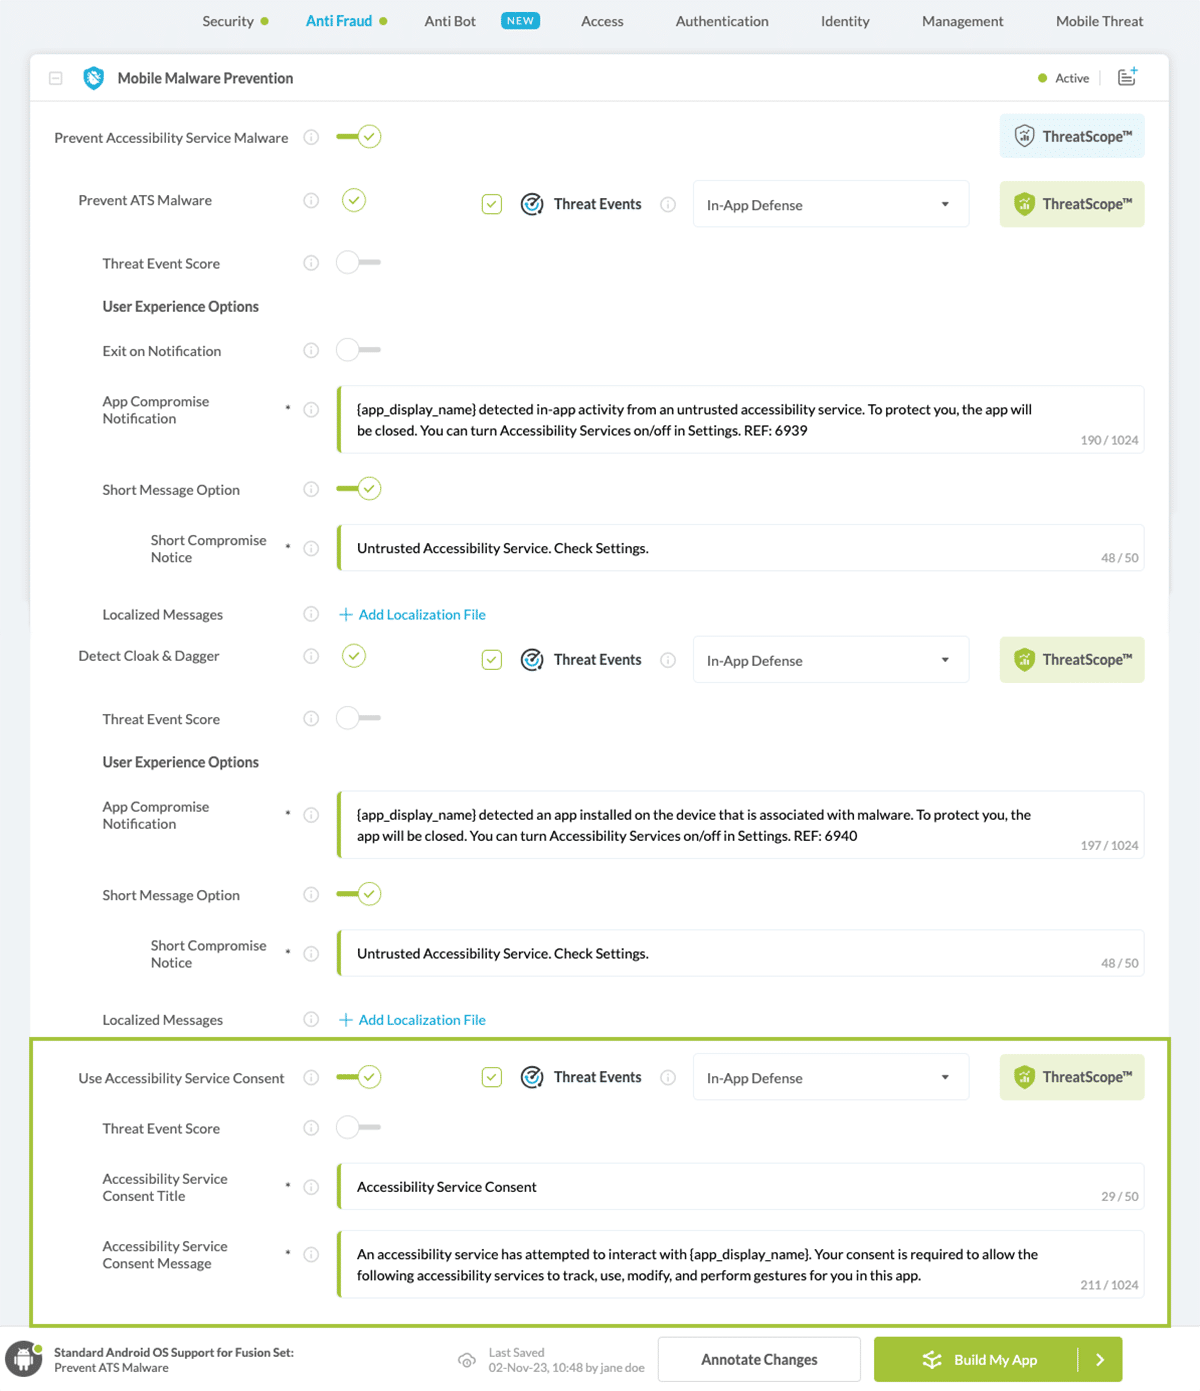 User Accessibility Service Consent option